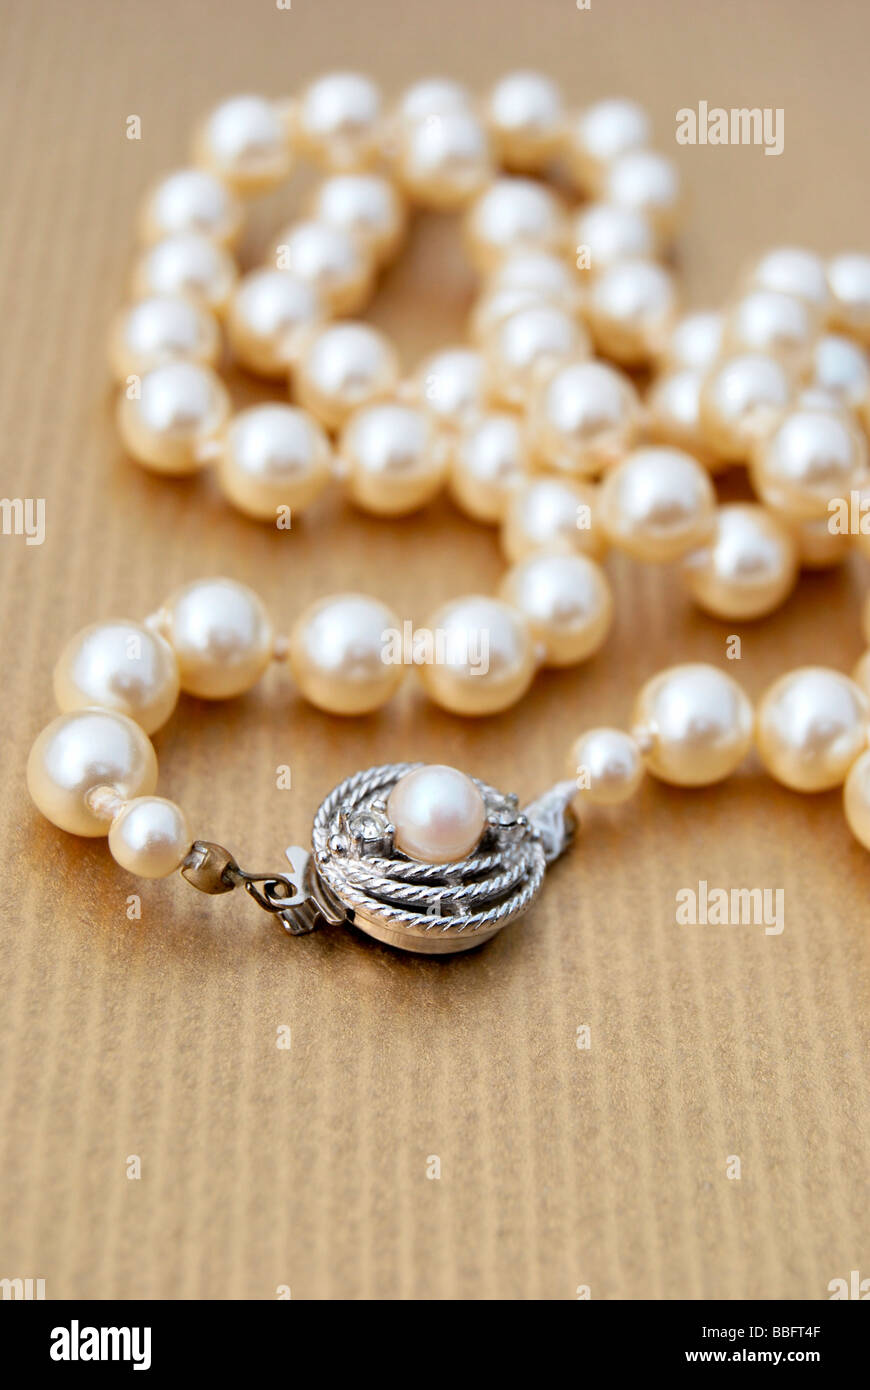 Pearl necklace with a pendant Stock Photo